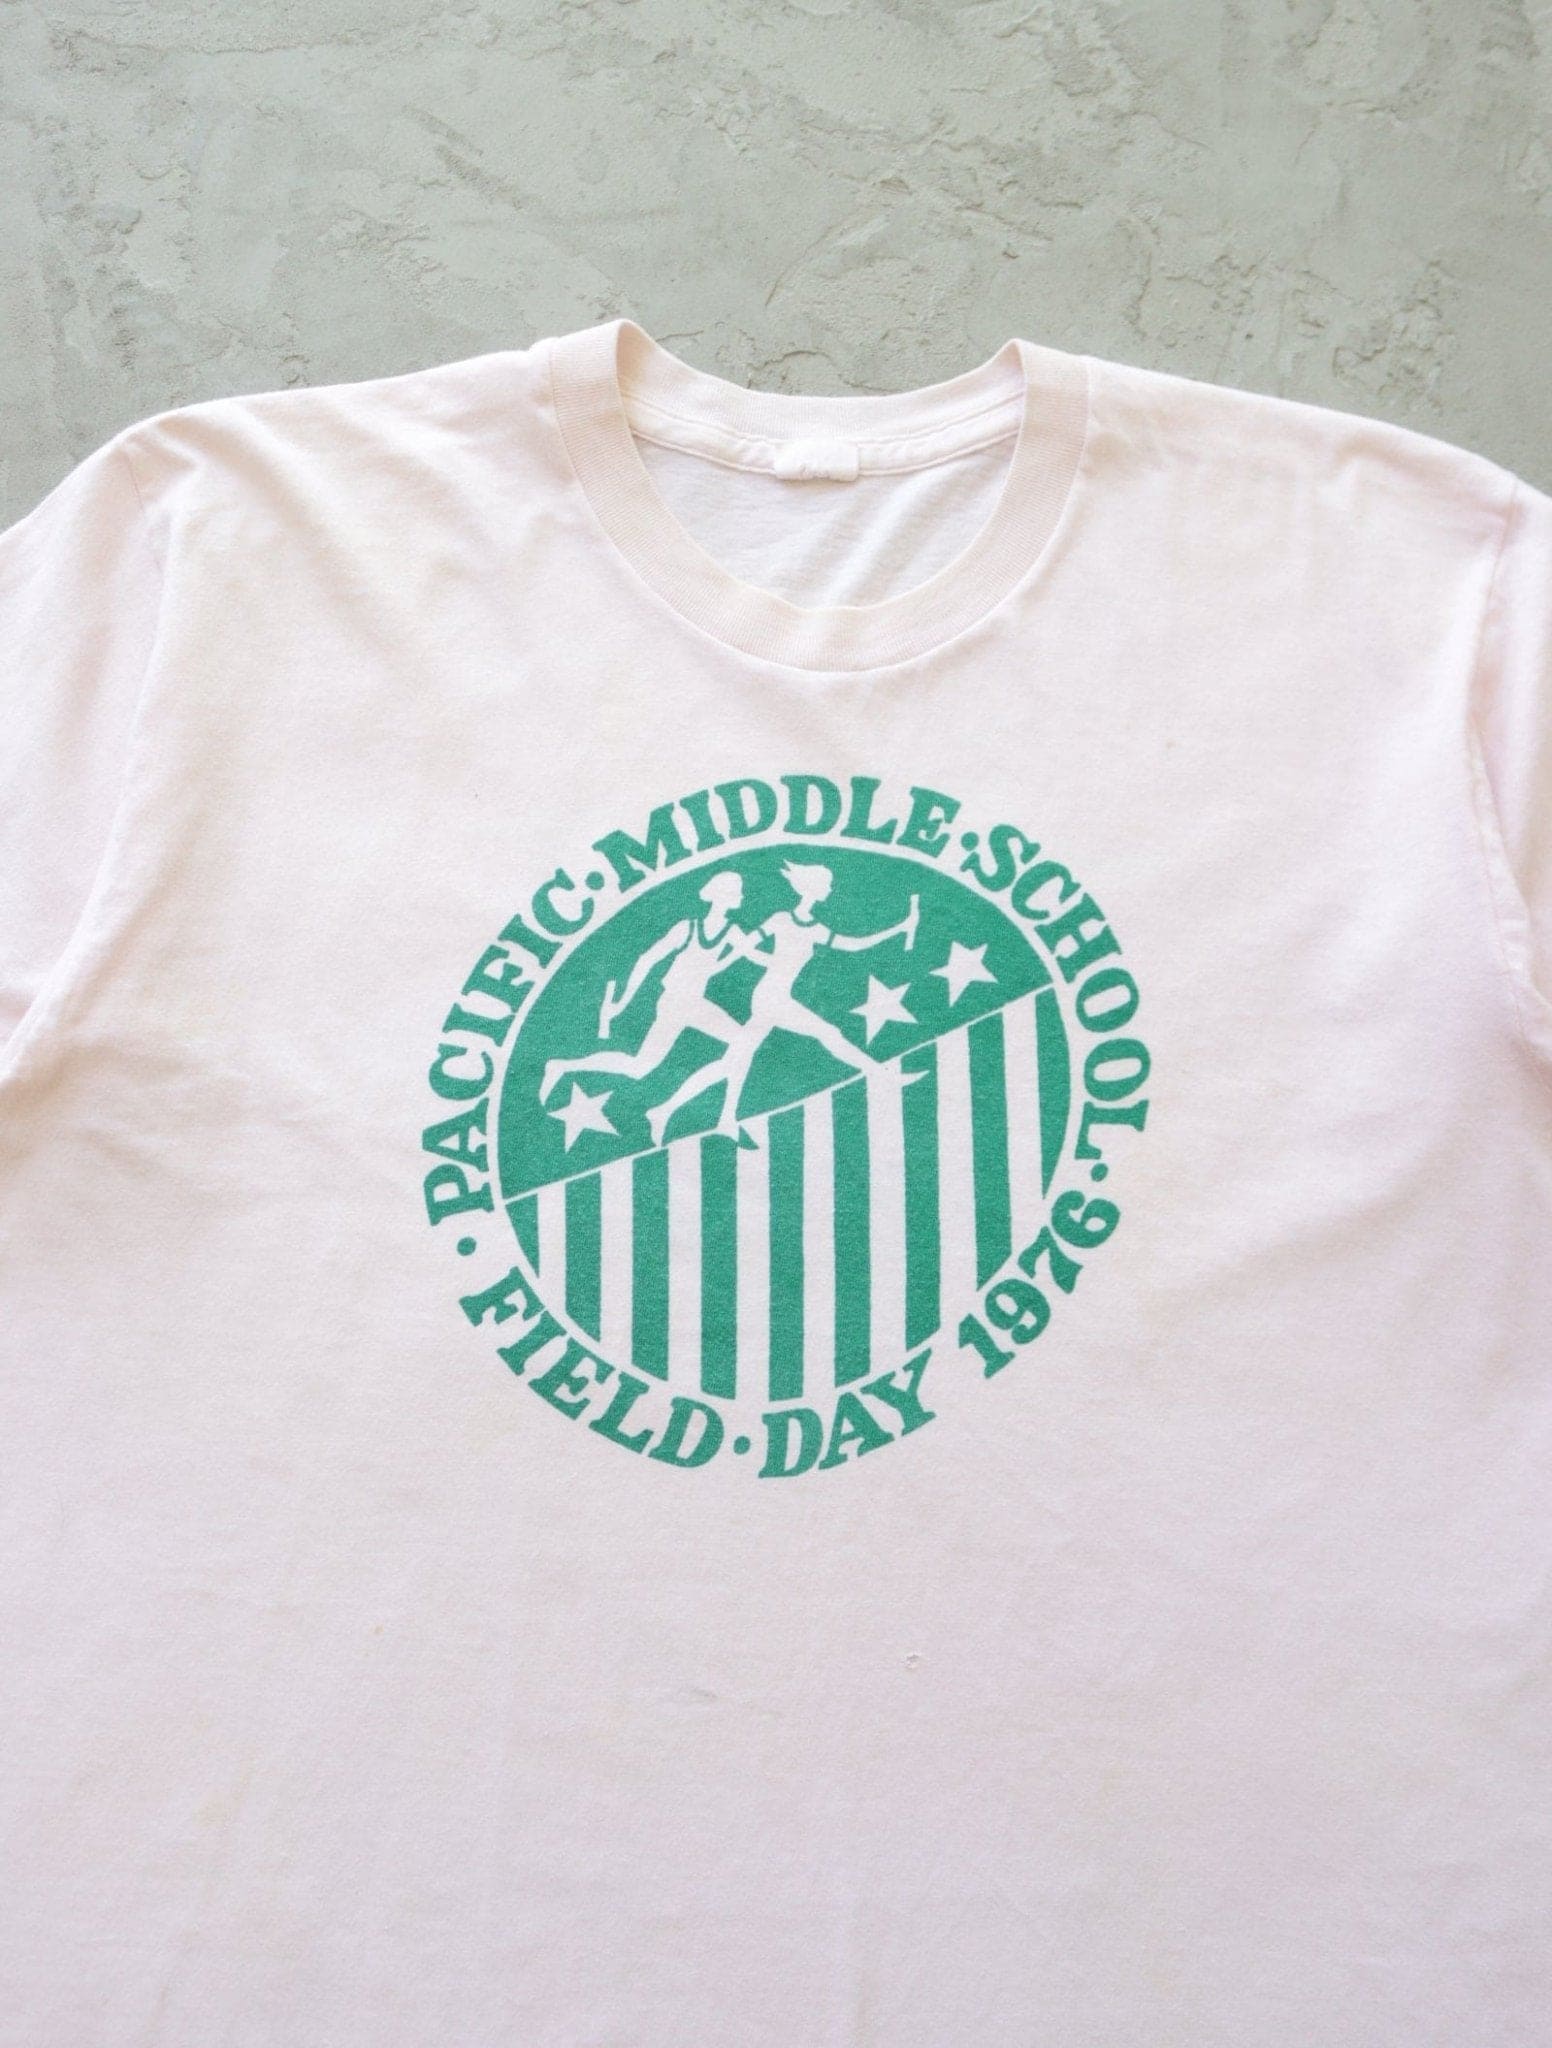 1970S PACIFIC MIDDLE SCHOOL TEE - TWO FOLD